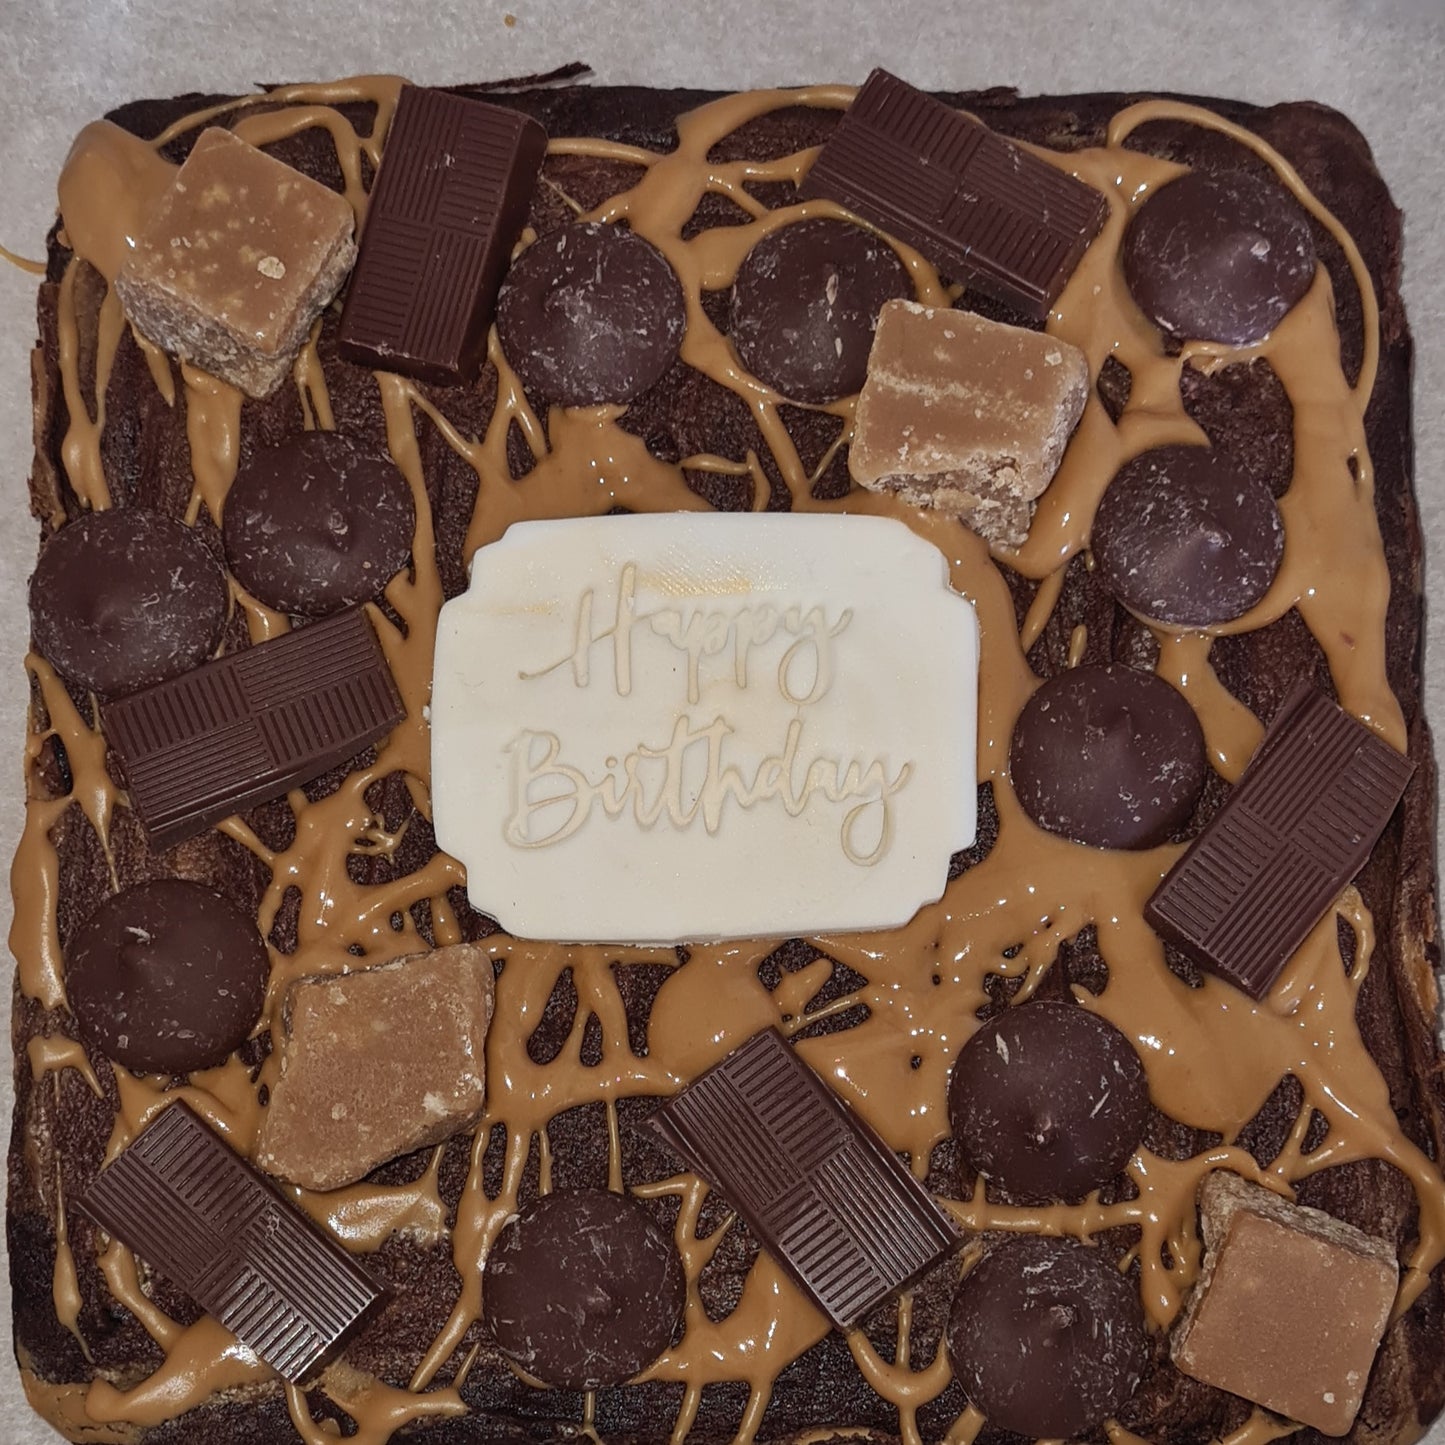 A happy birthday brownie, smothered in caramel sauce, chocolate buttons and chocolate chunks!